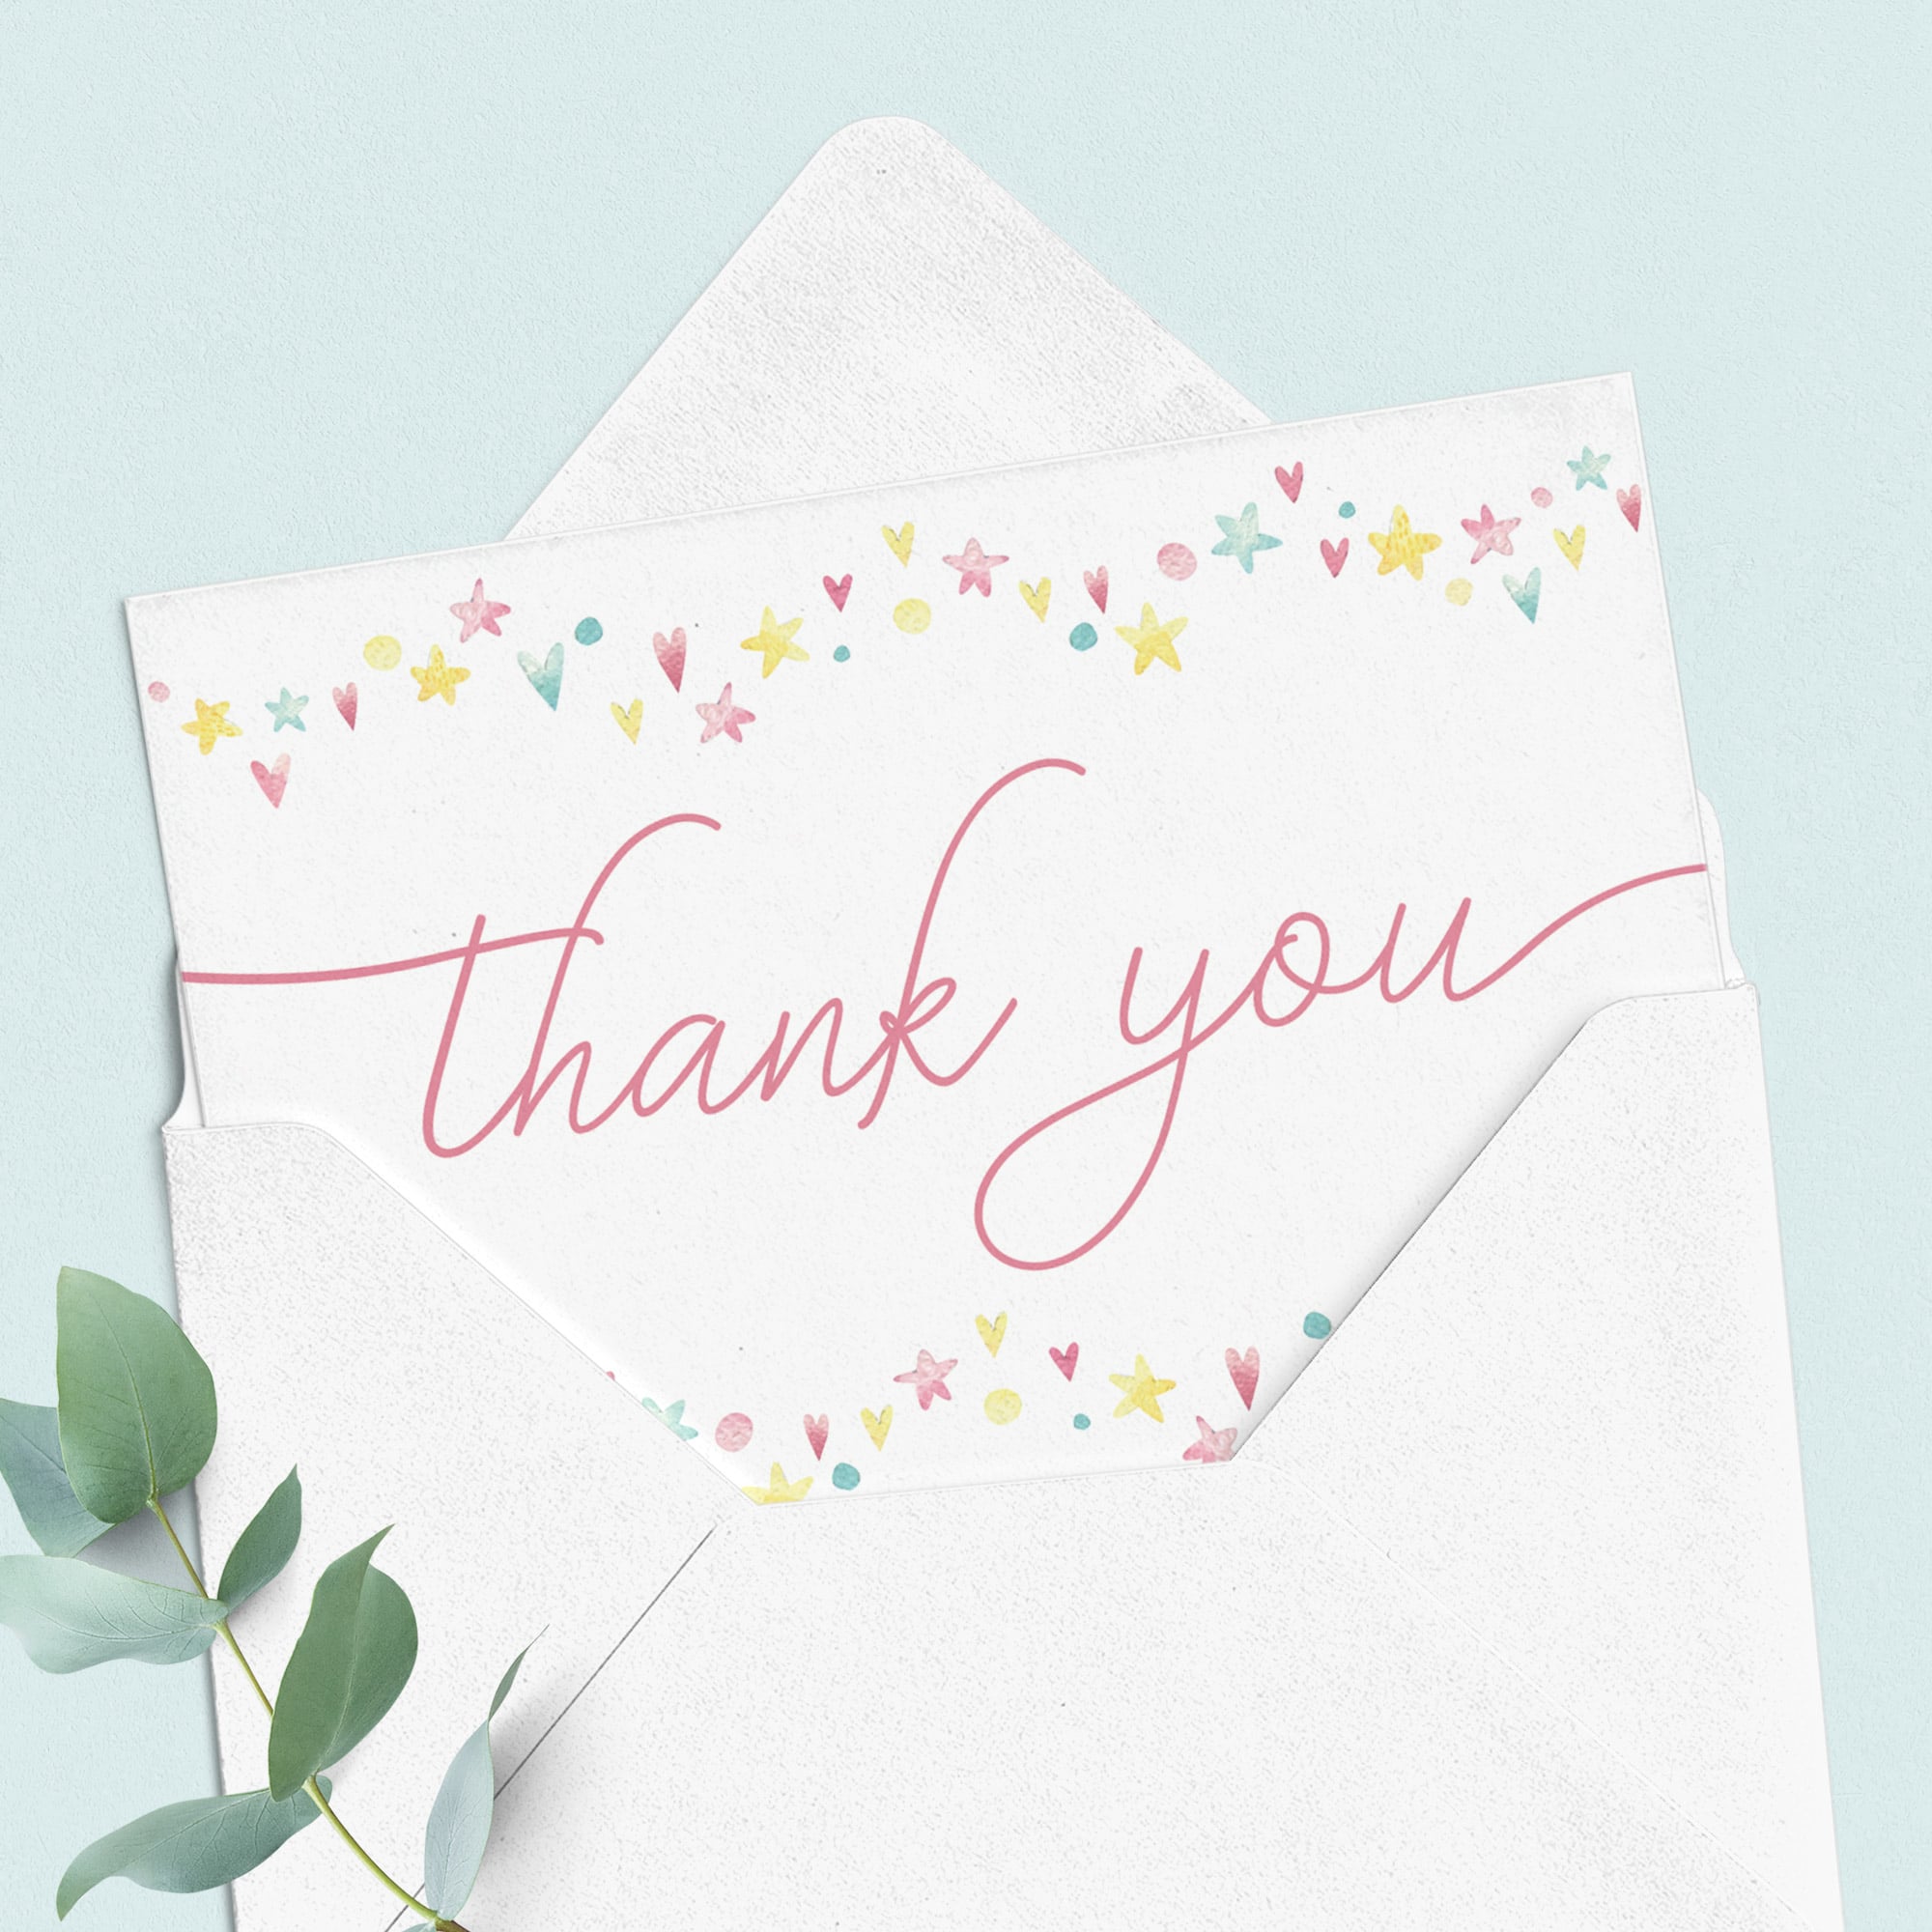 Printable folded thank you cards for pink shower by LittleSizzle